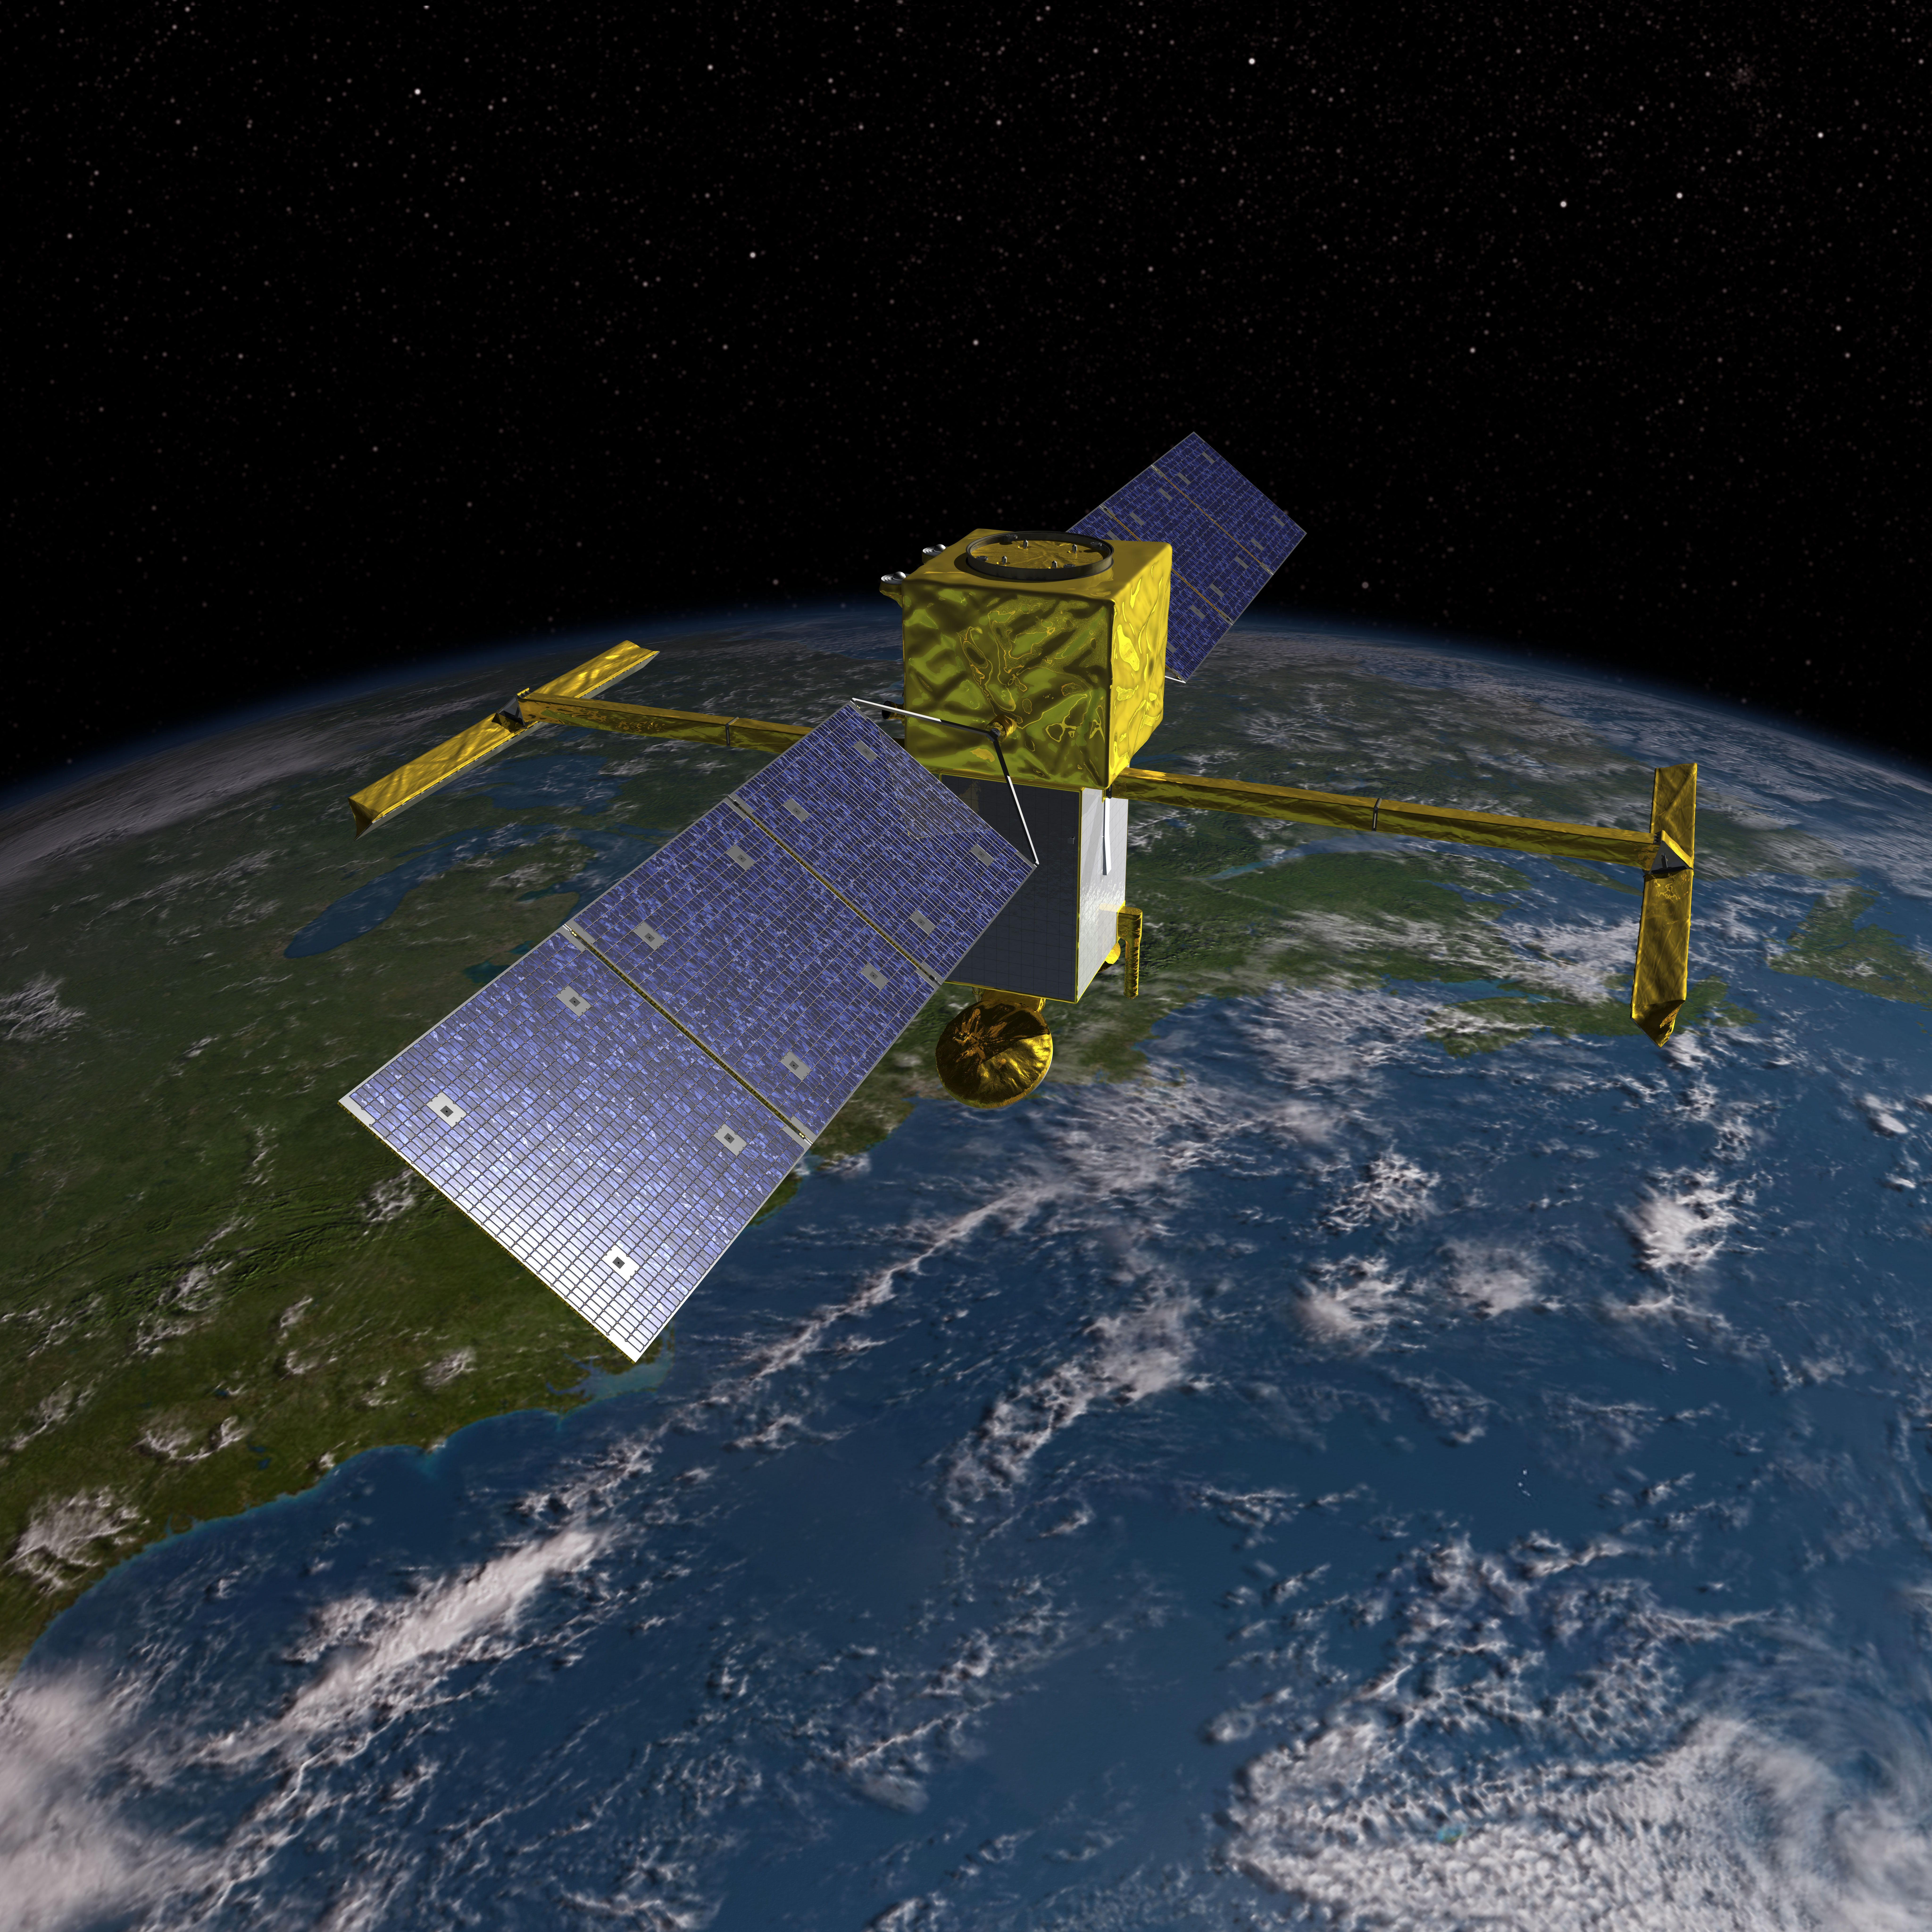 An artist's concept of the Surface Water and Ocean Topography (SWOT) satellite, which will complete the first global survey of Earth's surface water, measure how water bodies change over time and improve ocean circulation models to better predict weather and climate patterns. Image credit: NASA/JPL-Caltech